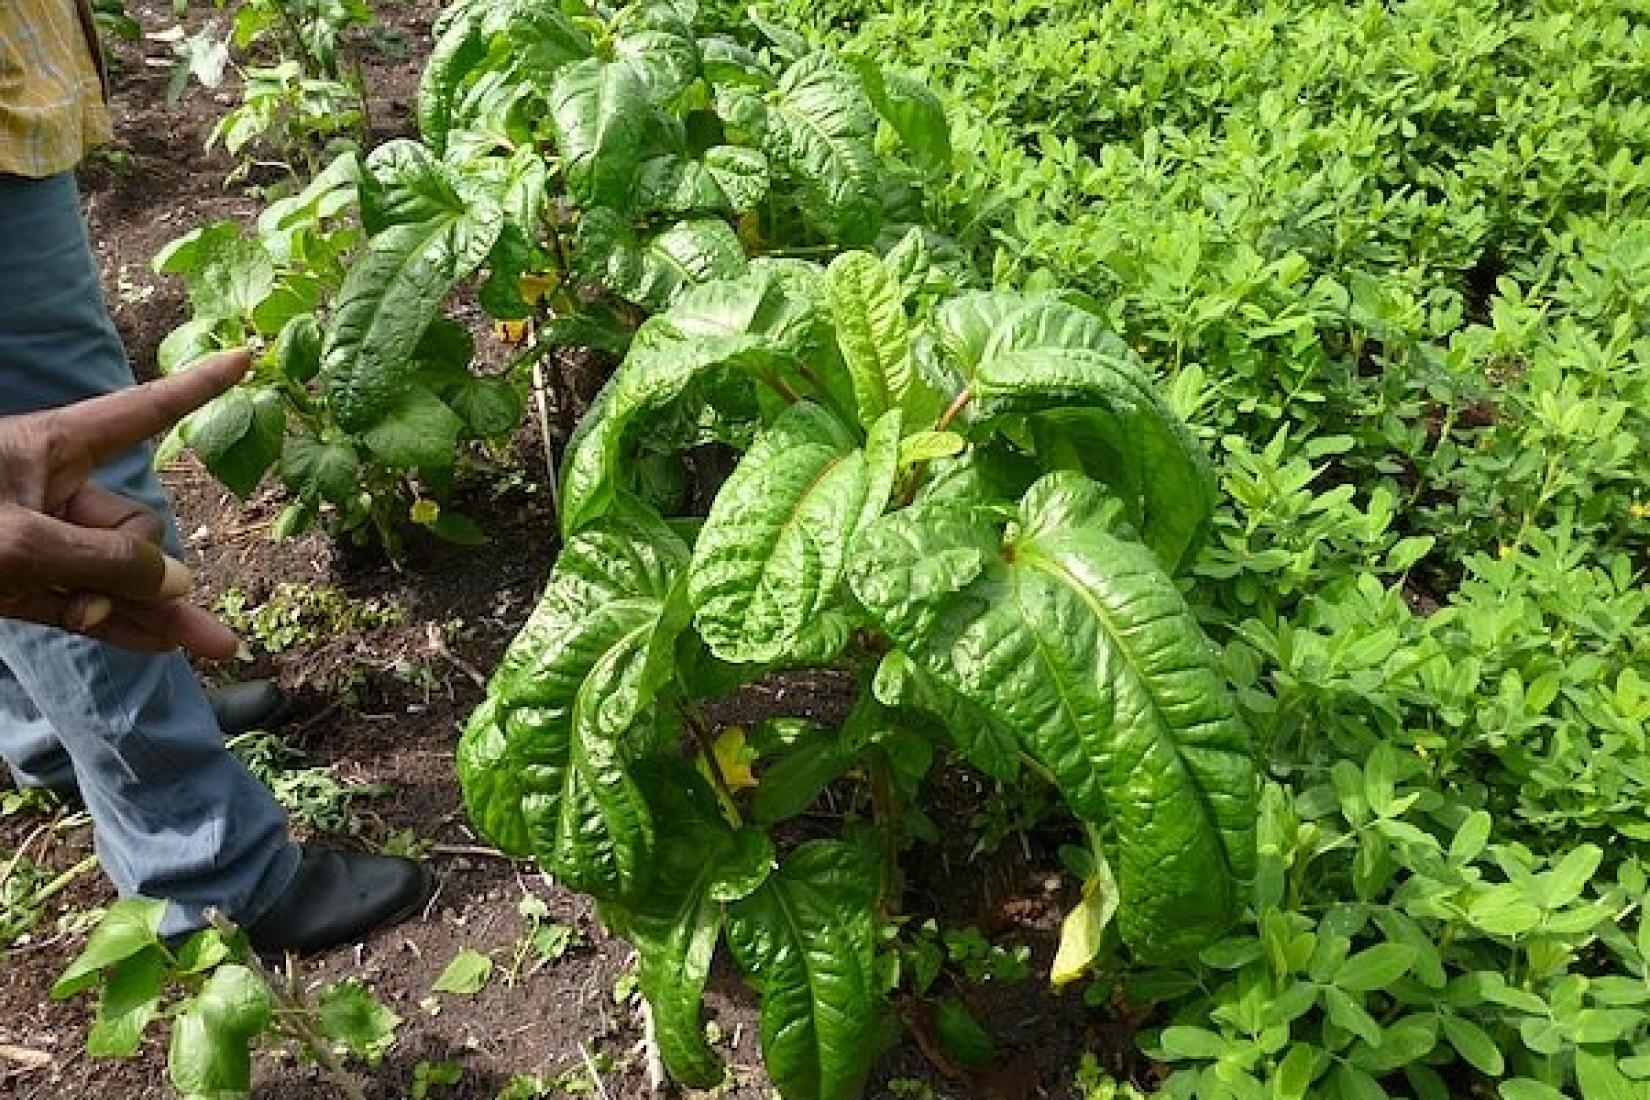 Aibika being is being grown by smallholder farmers in Papua New Guinea. Image: George Curry